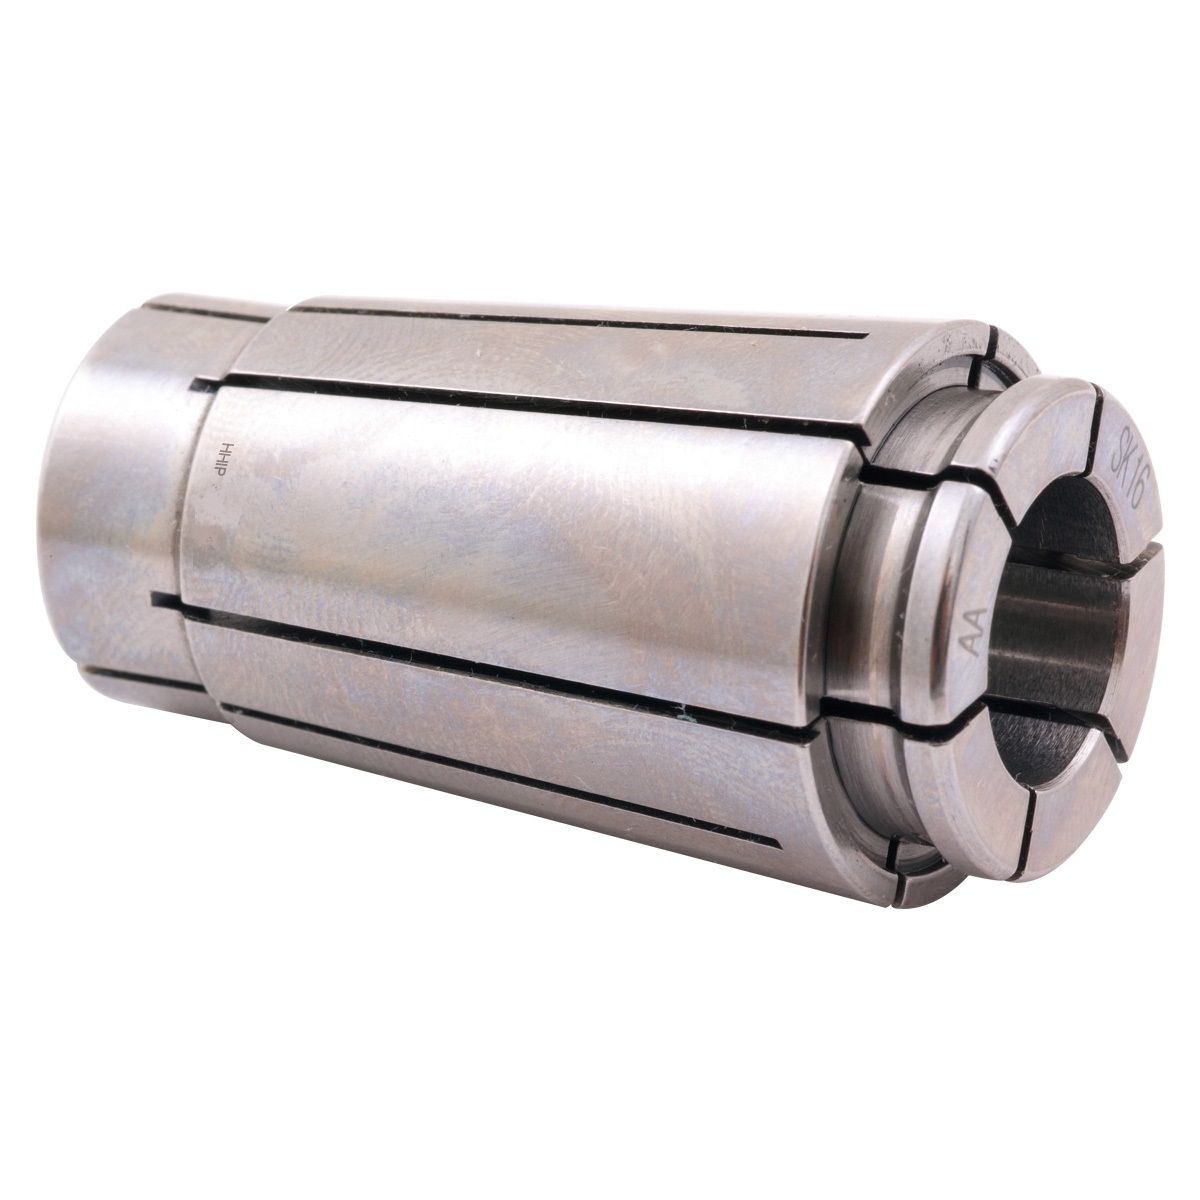 PRO-SERIES 5/16" SK16 LYNDEX STYLE COLLET (3901-5444)